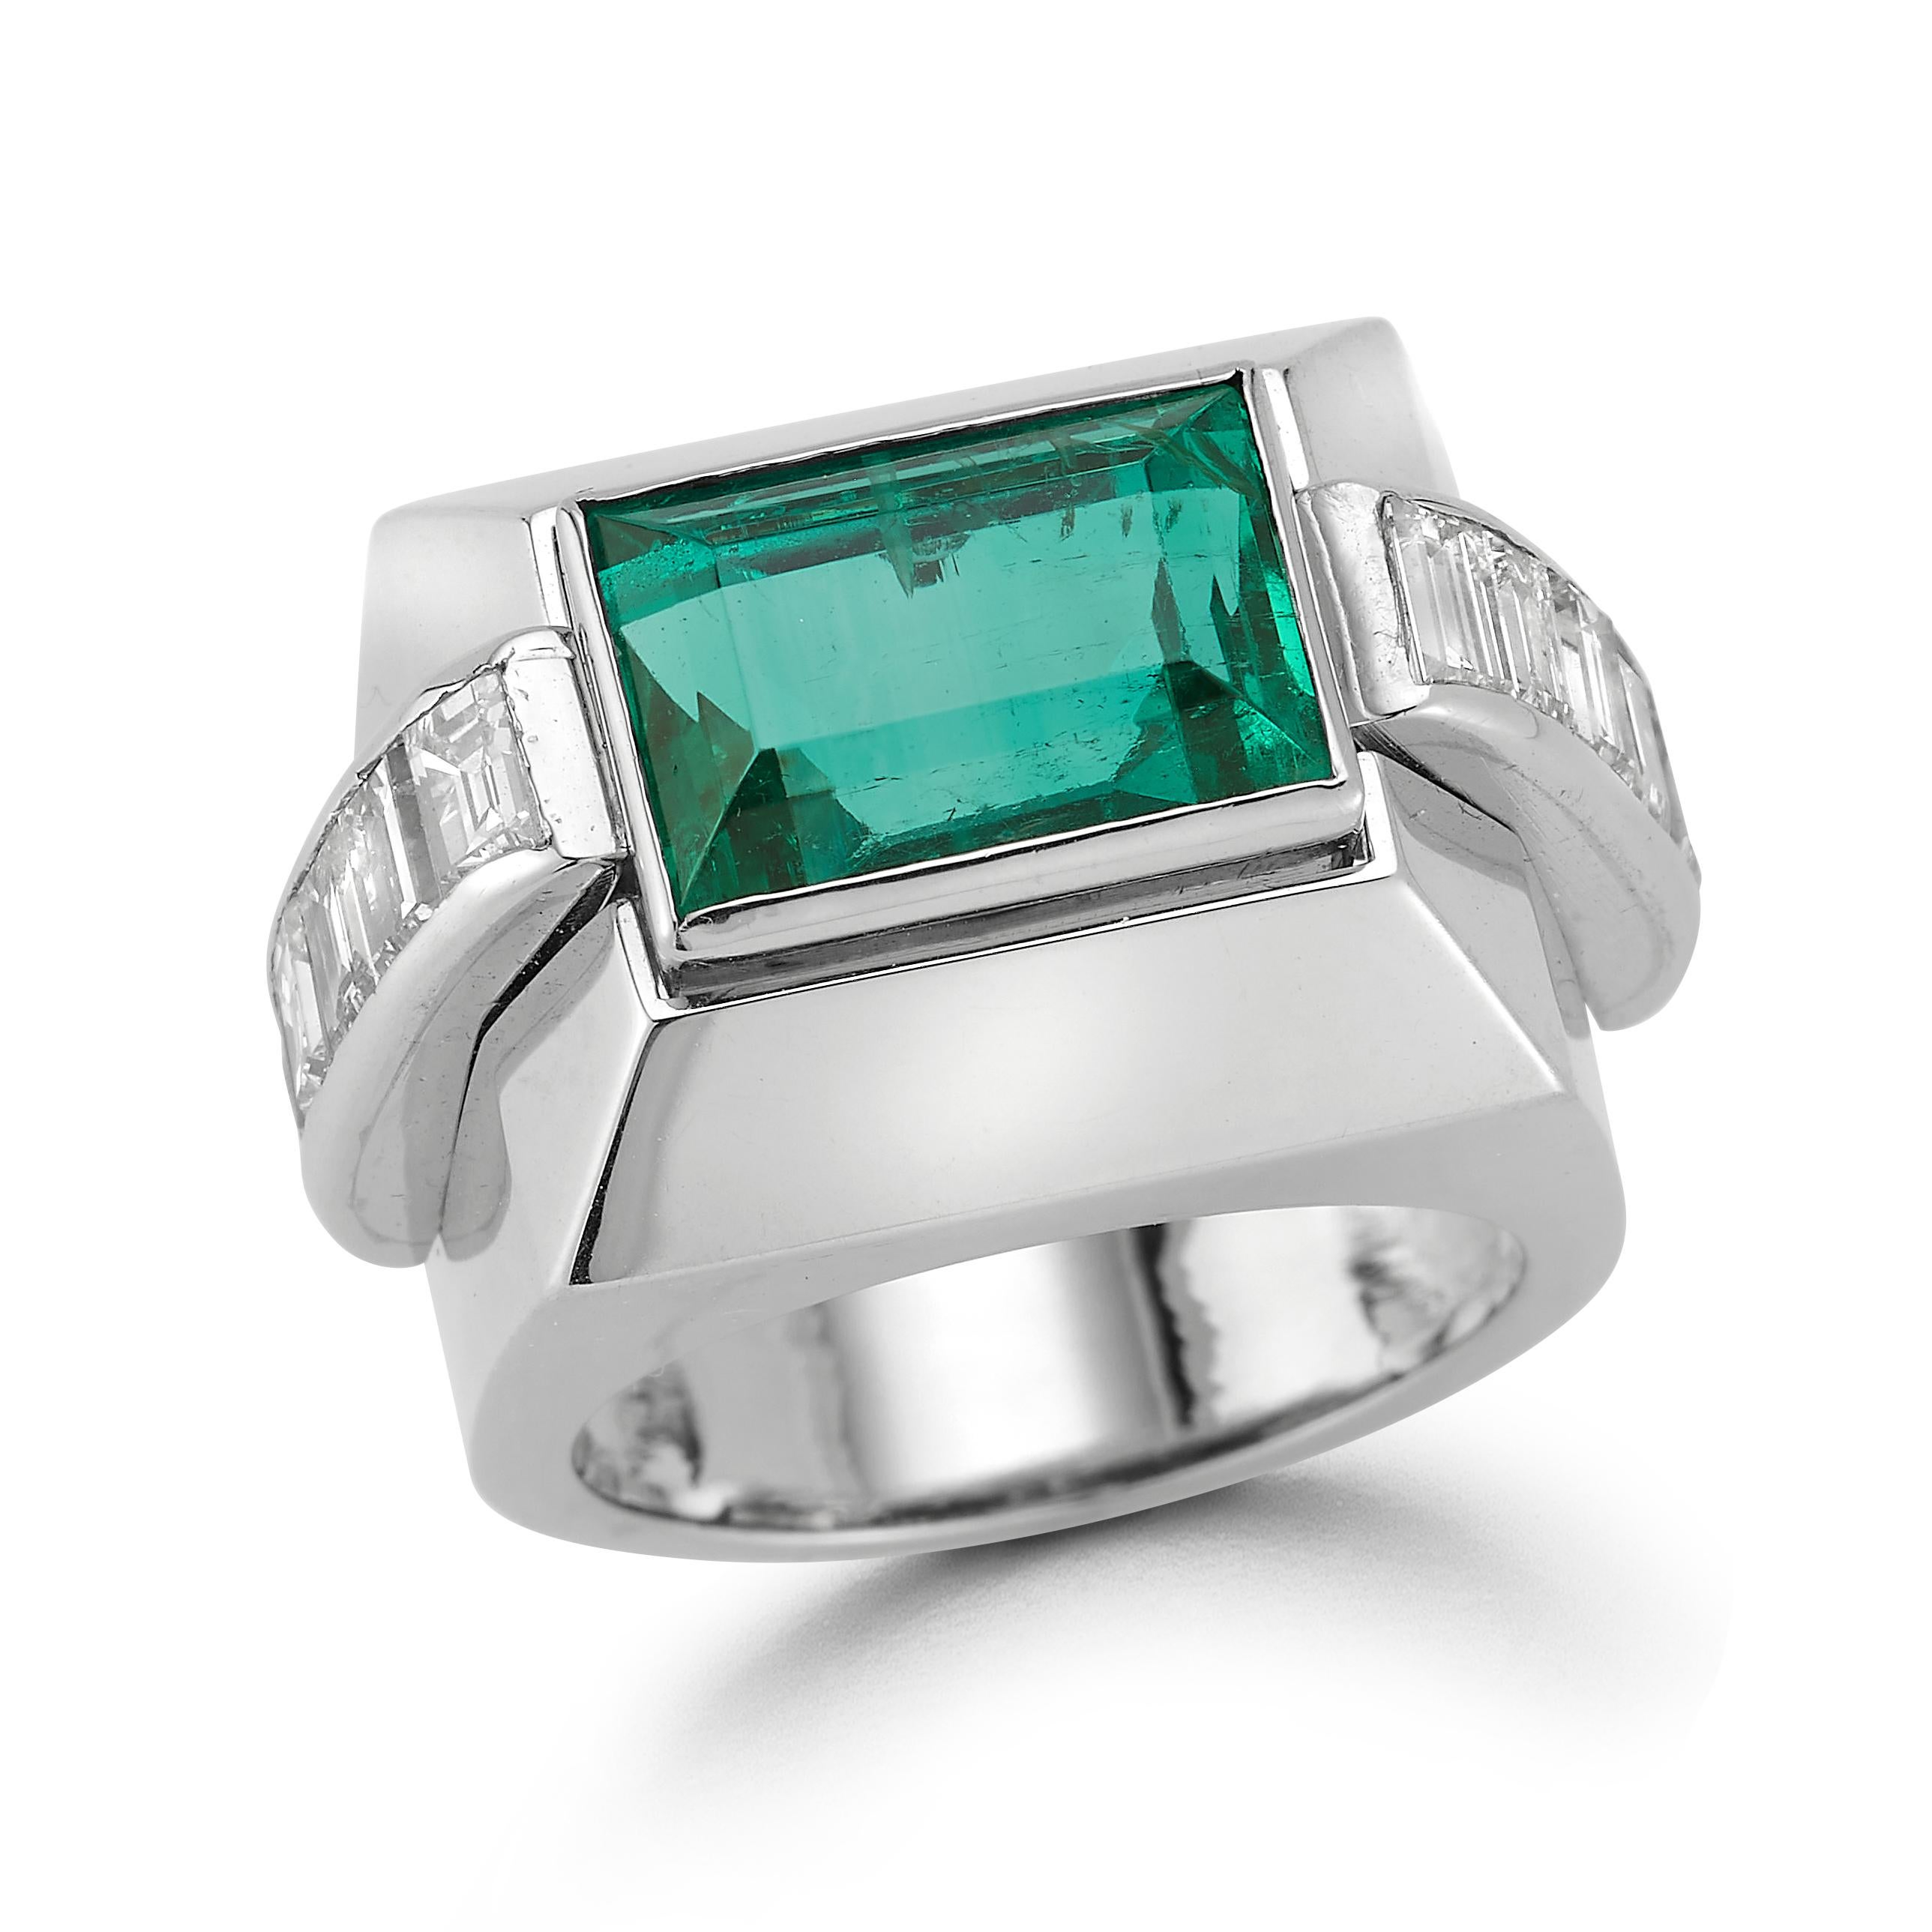 David Webb Colombian Emerald & Diamond Men's Ring

A platinum and 18 karat white gold ring set with an AGL certified Colombian step cut emerald and 12 baguette cut diamonds

Accompanied by a David Webb certificate of authenticity and an AGL